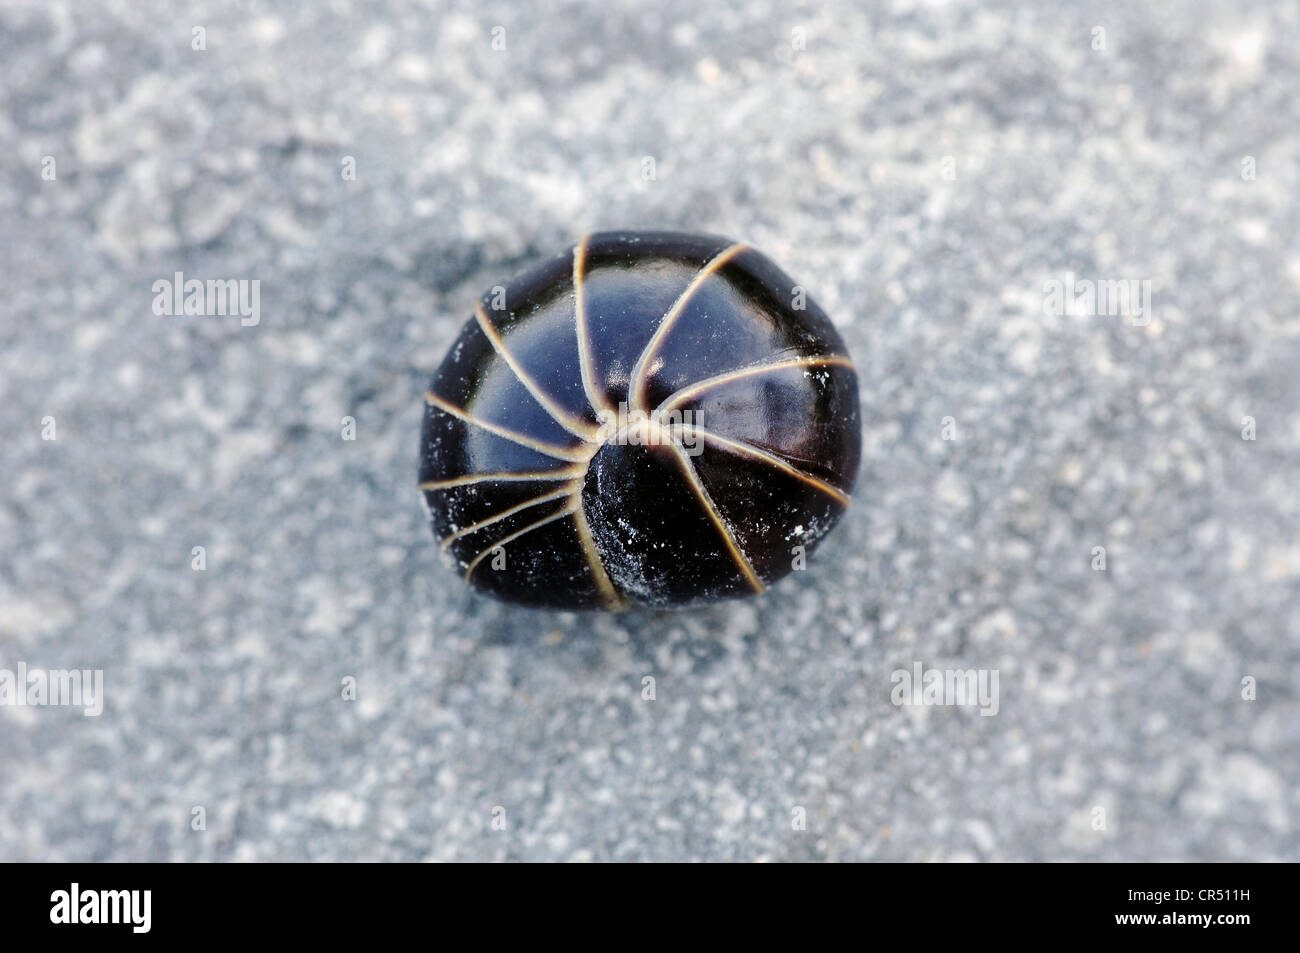 Pill Millipede (Glomeris spec.), curled up in defence, North Rhine-Westphalia, Germany Stock Photo